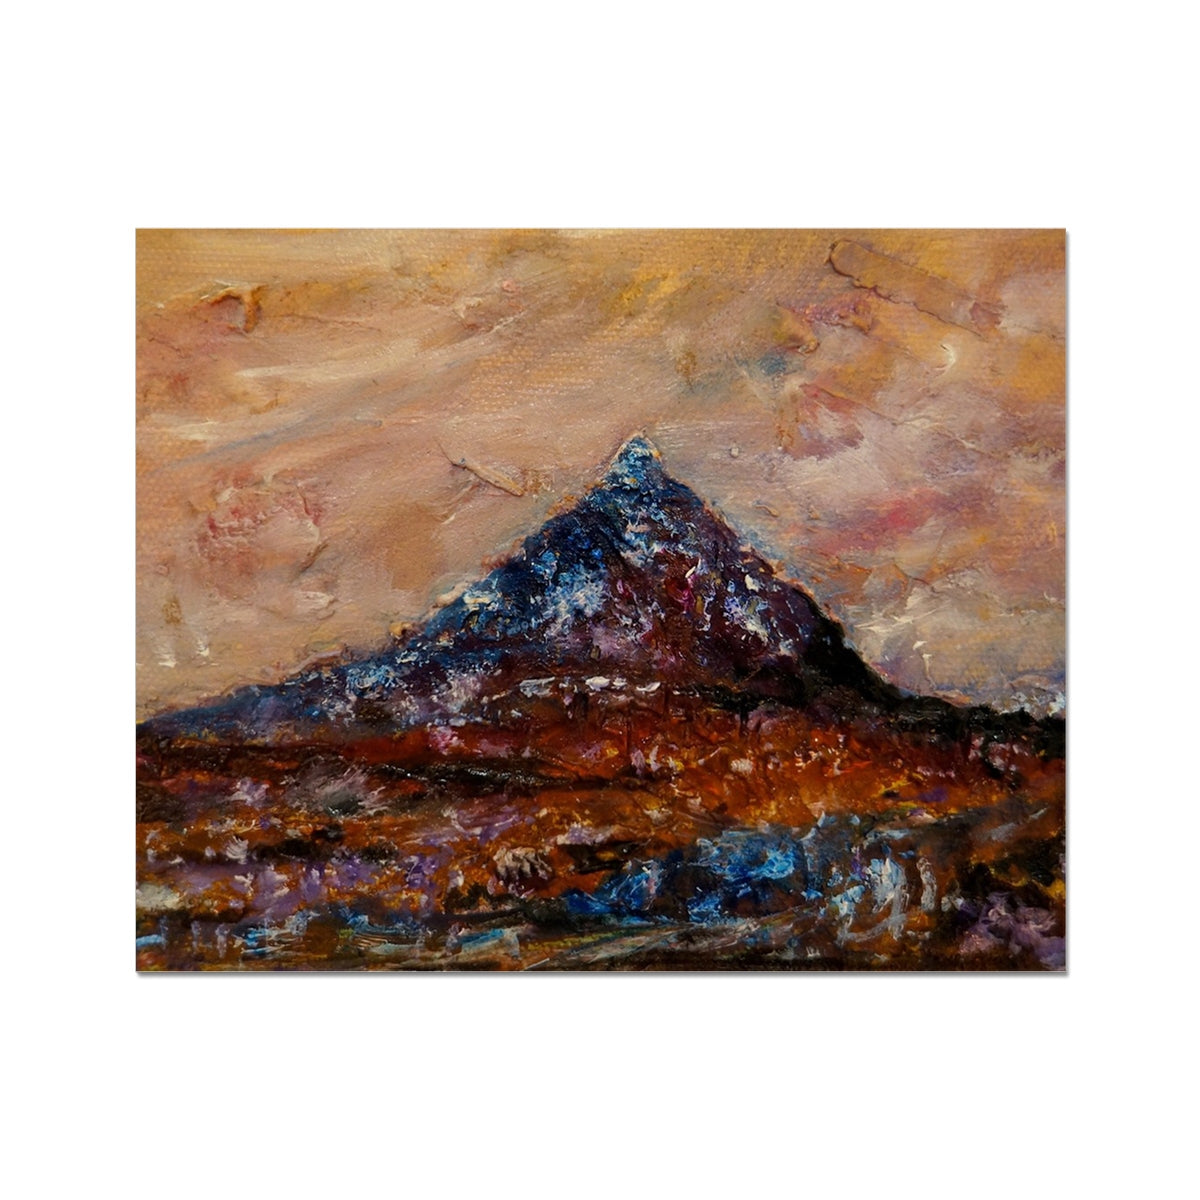 Buachaille Etive Mòr Painting | Artist Proof Collector Prints From Scotland-Artist Proof Collector Prints-Glencoe Art Gallery-20"x16"-Paintings, Prints, Homeware, Art Gifts From Scotland By Scottish Artist Kevin Hunter